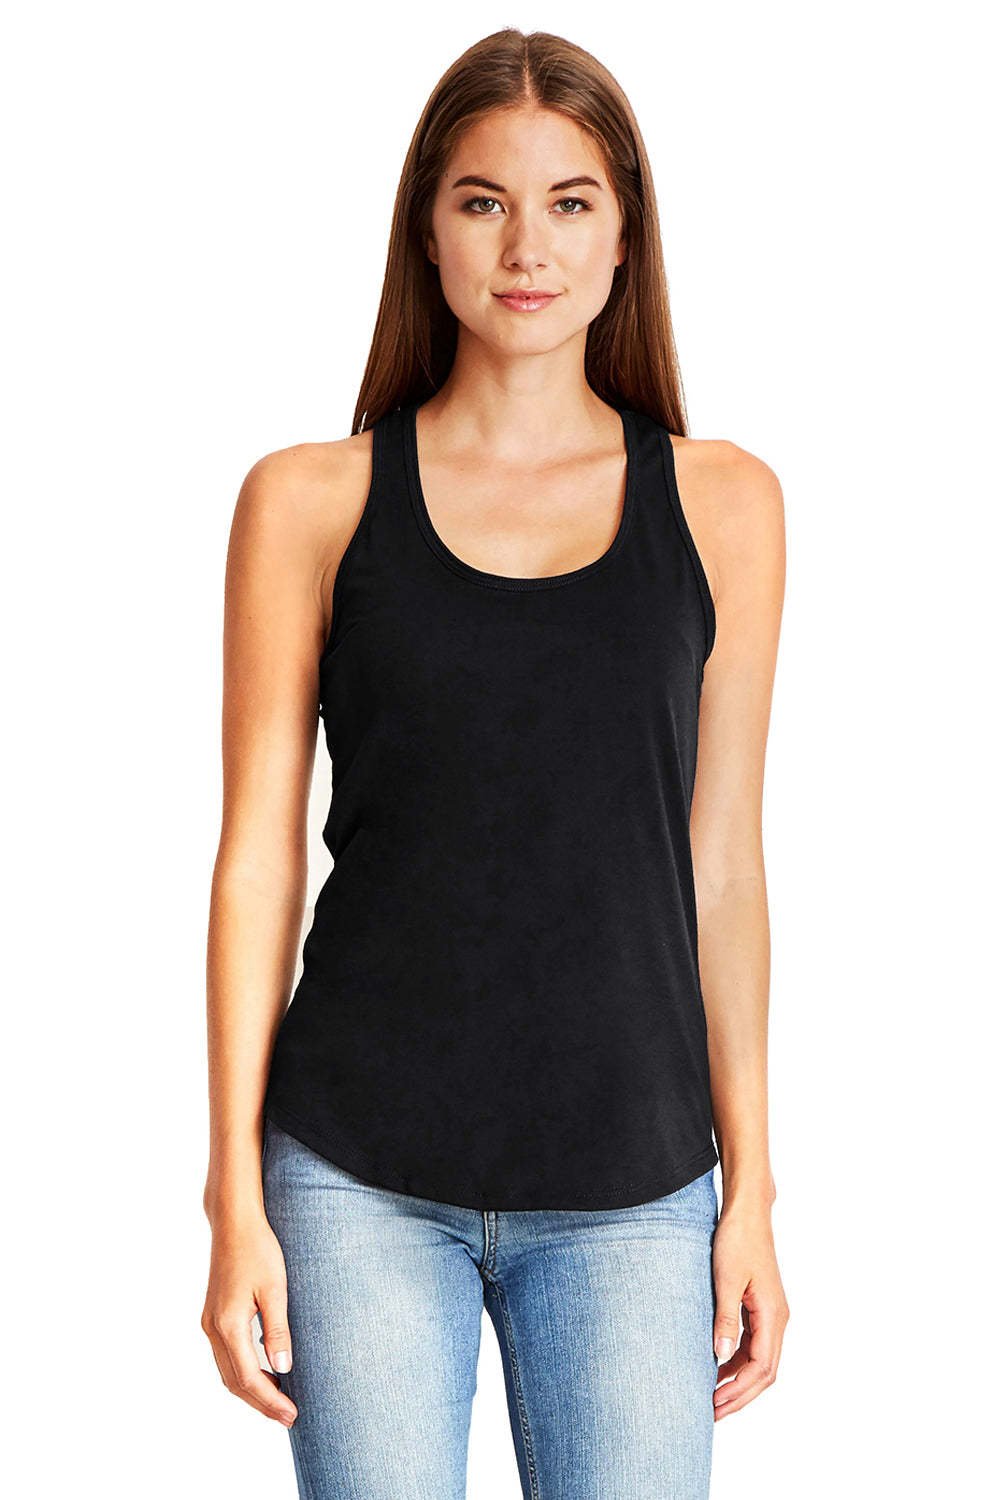 Next Level 6338 Womens Gathered Tank Top Black Front